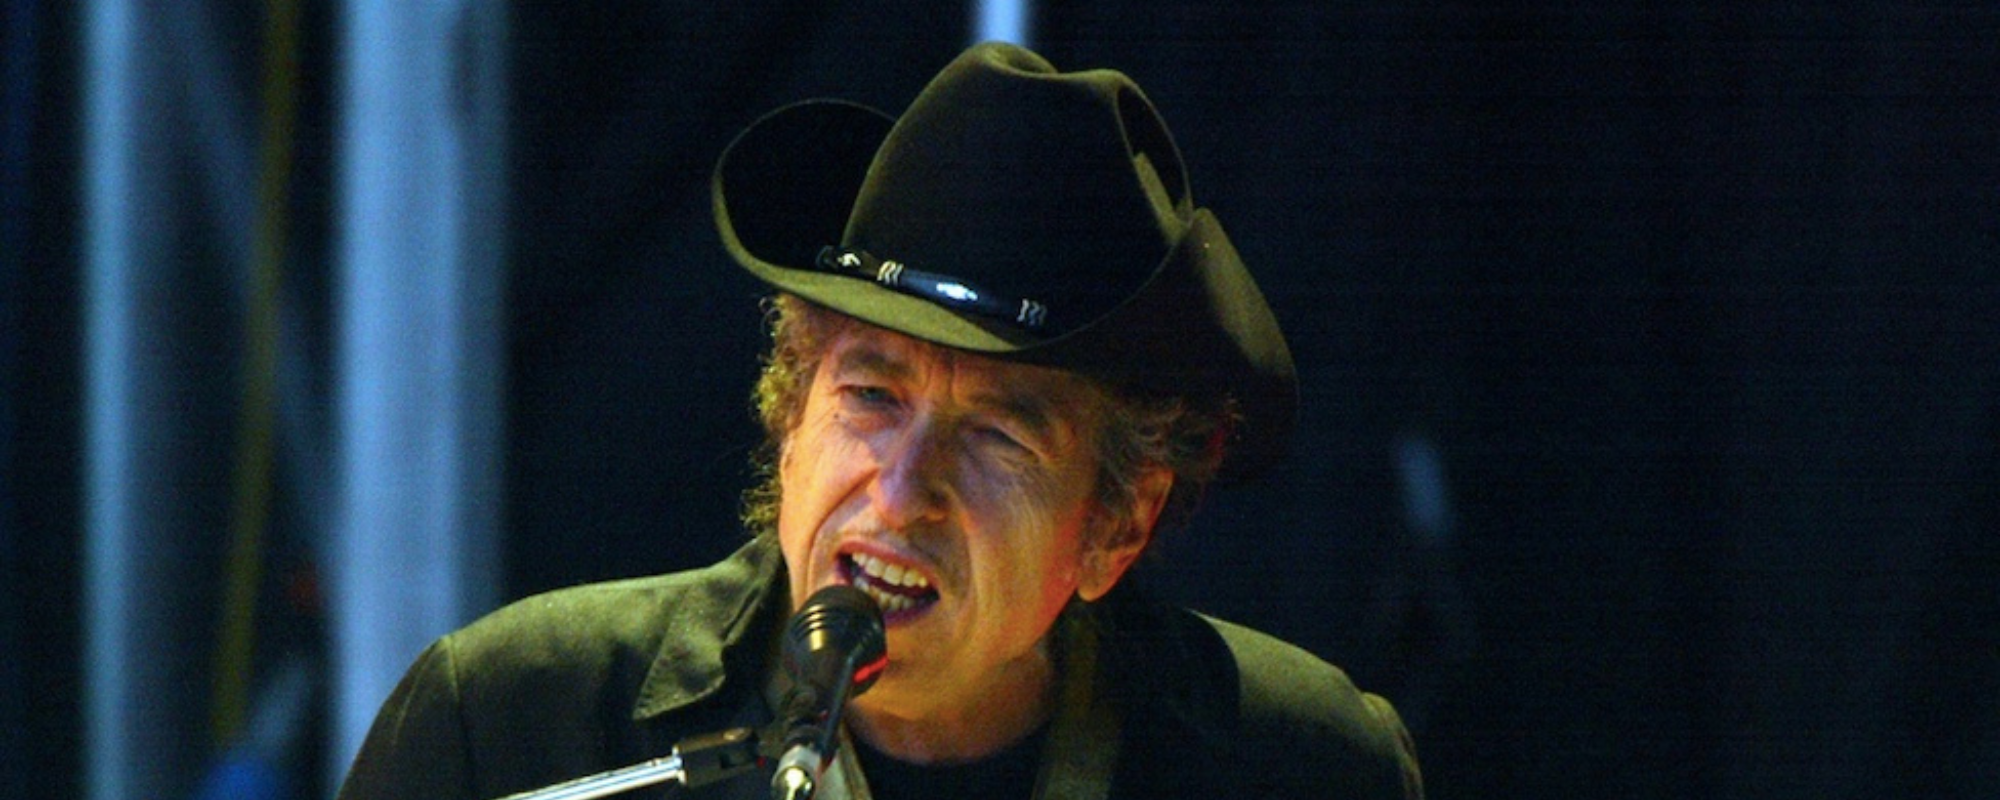 Listen: Bob Dylan Covers Merle Haggard’s 1979 Classic “Footlights” at the Orpheum Theater in Boston